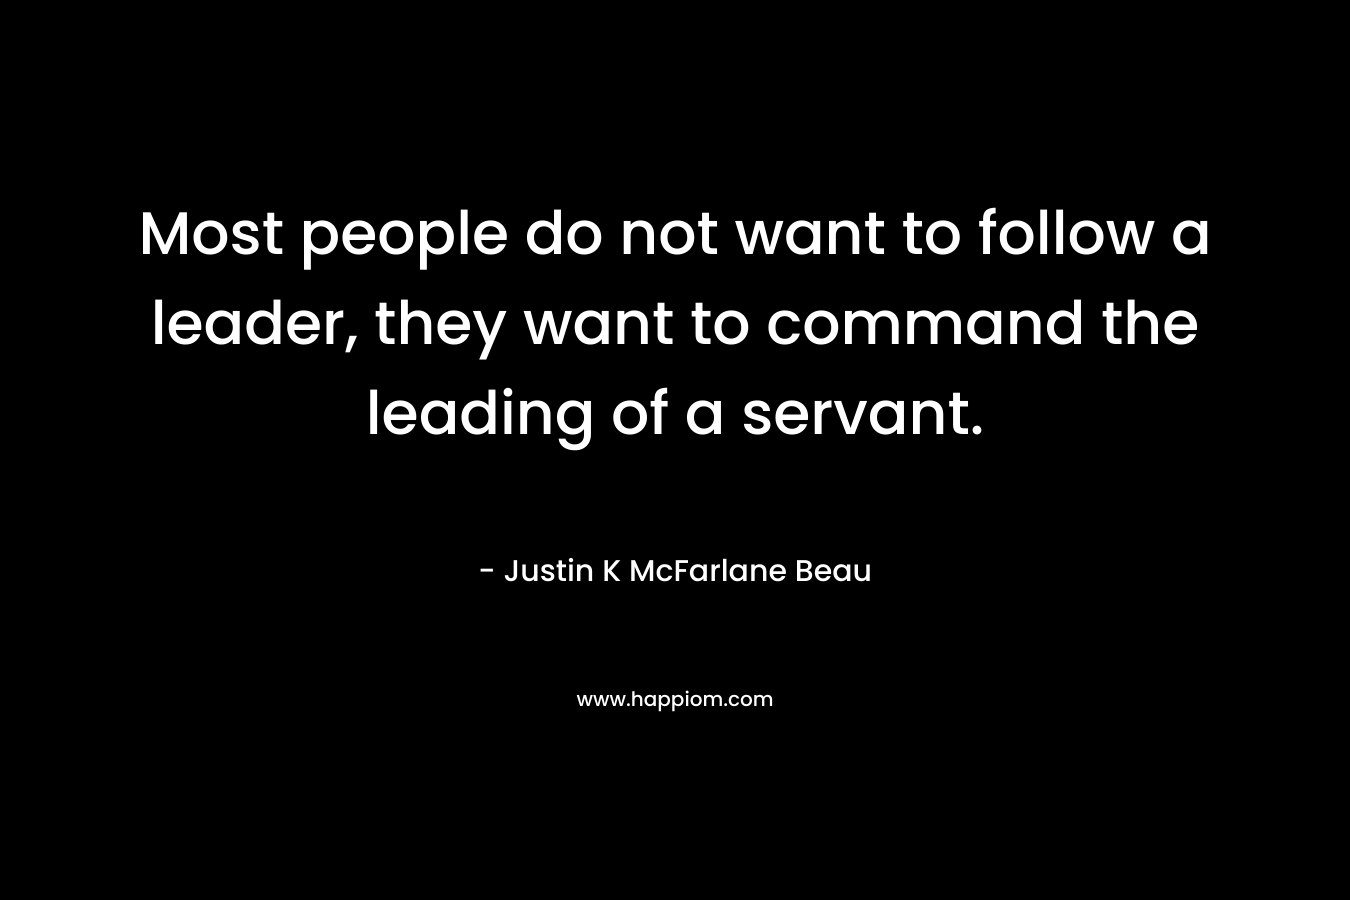 Most people do not want to follow a leader, they want to command the leading of a servant. – Justin K McFarlane Beau